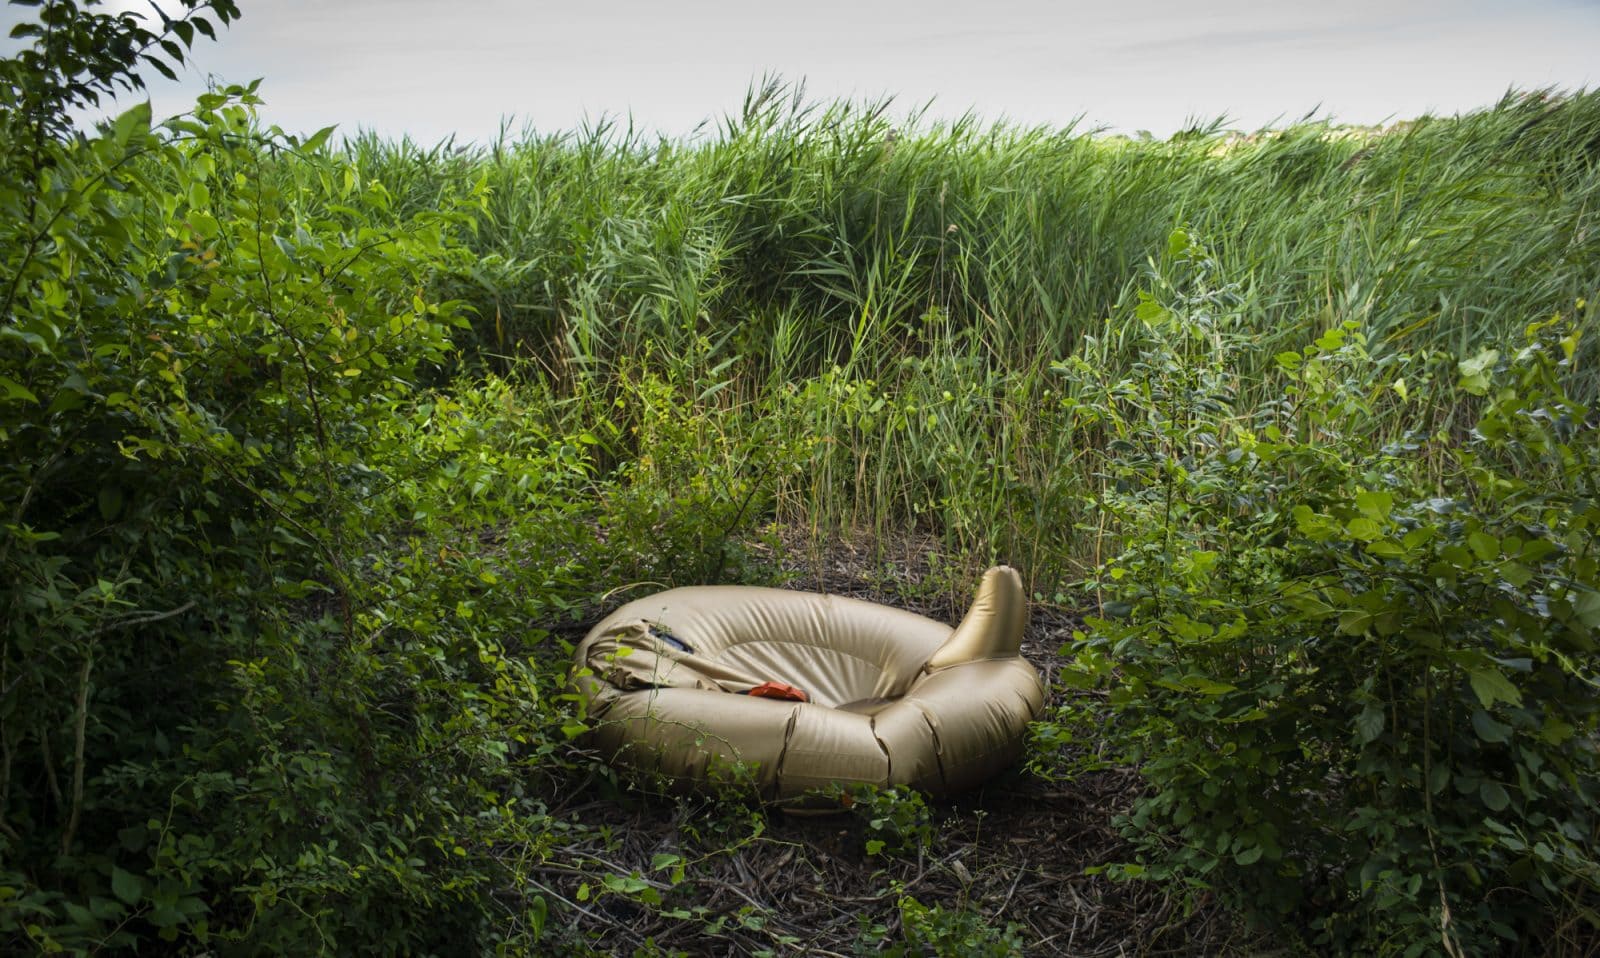 An abandoned pool float in a grassy field